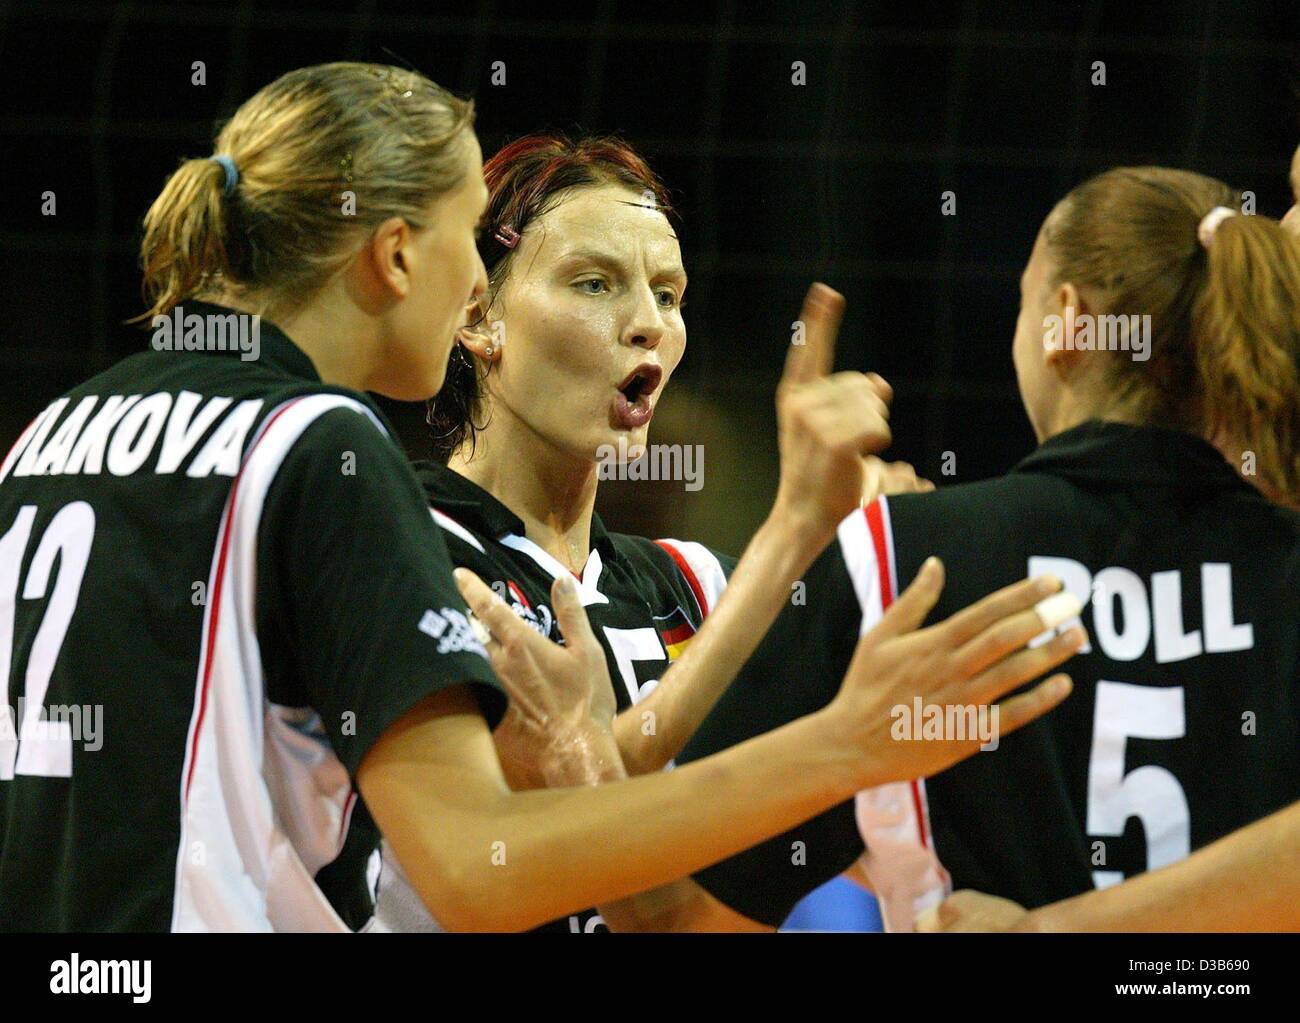 (dpa) - German player Angelina Gruen (C) discusses with her team mates Olessya Kulakova (L) and Sylvia Roll during the match against Italy at the Women's Volleyball World Championships in Muenster, 2 September 2002. Germany lost 0-3. This second defeat after the 1-3 against Bulgaria brought the Germ Stock Photo